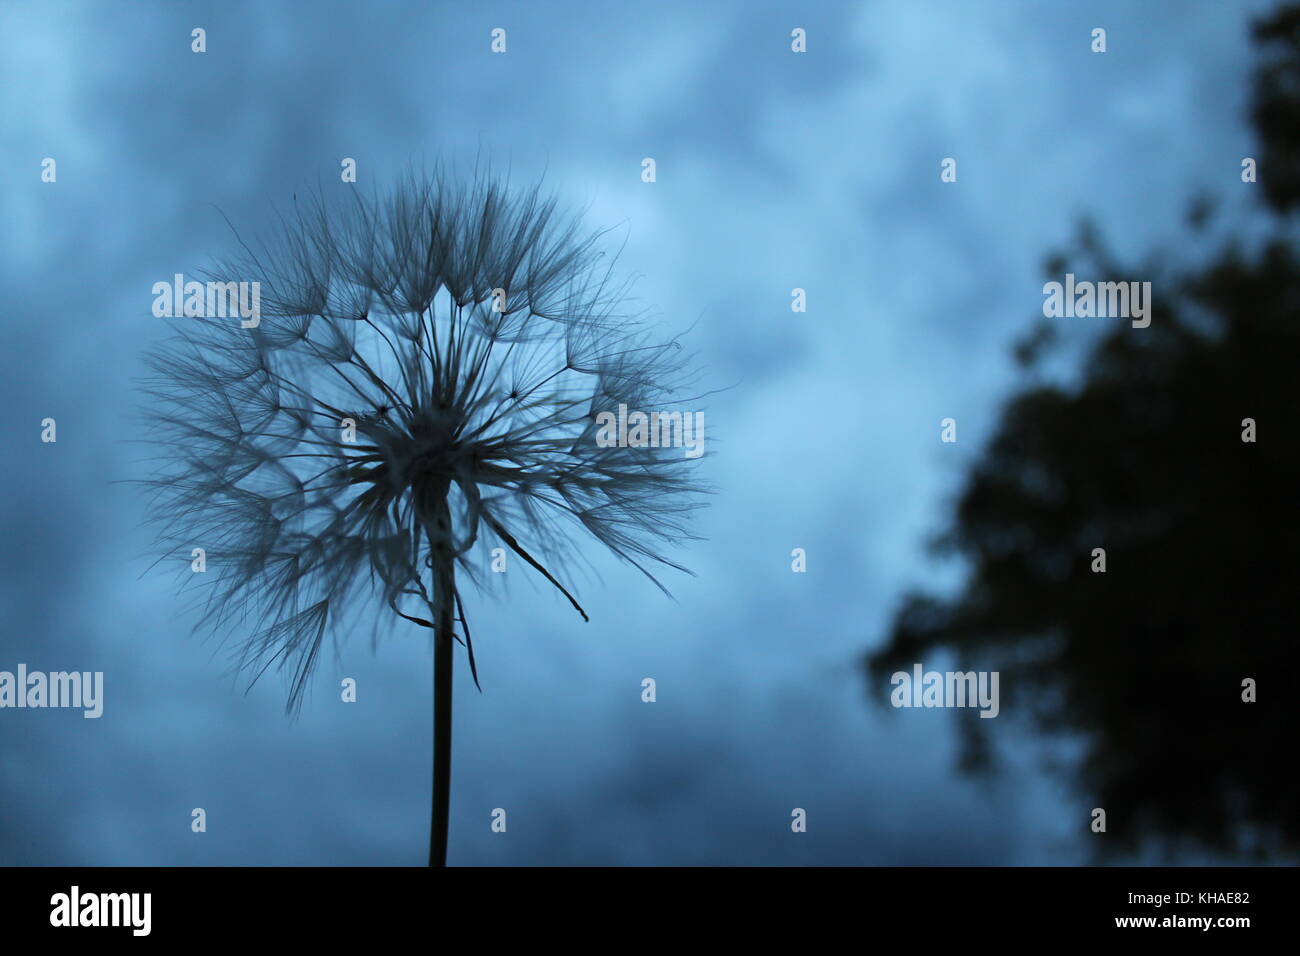 Dandelion on a grey and cloudy evening. Stock Photo